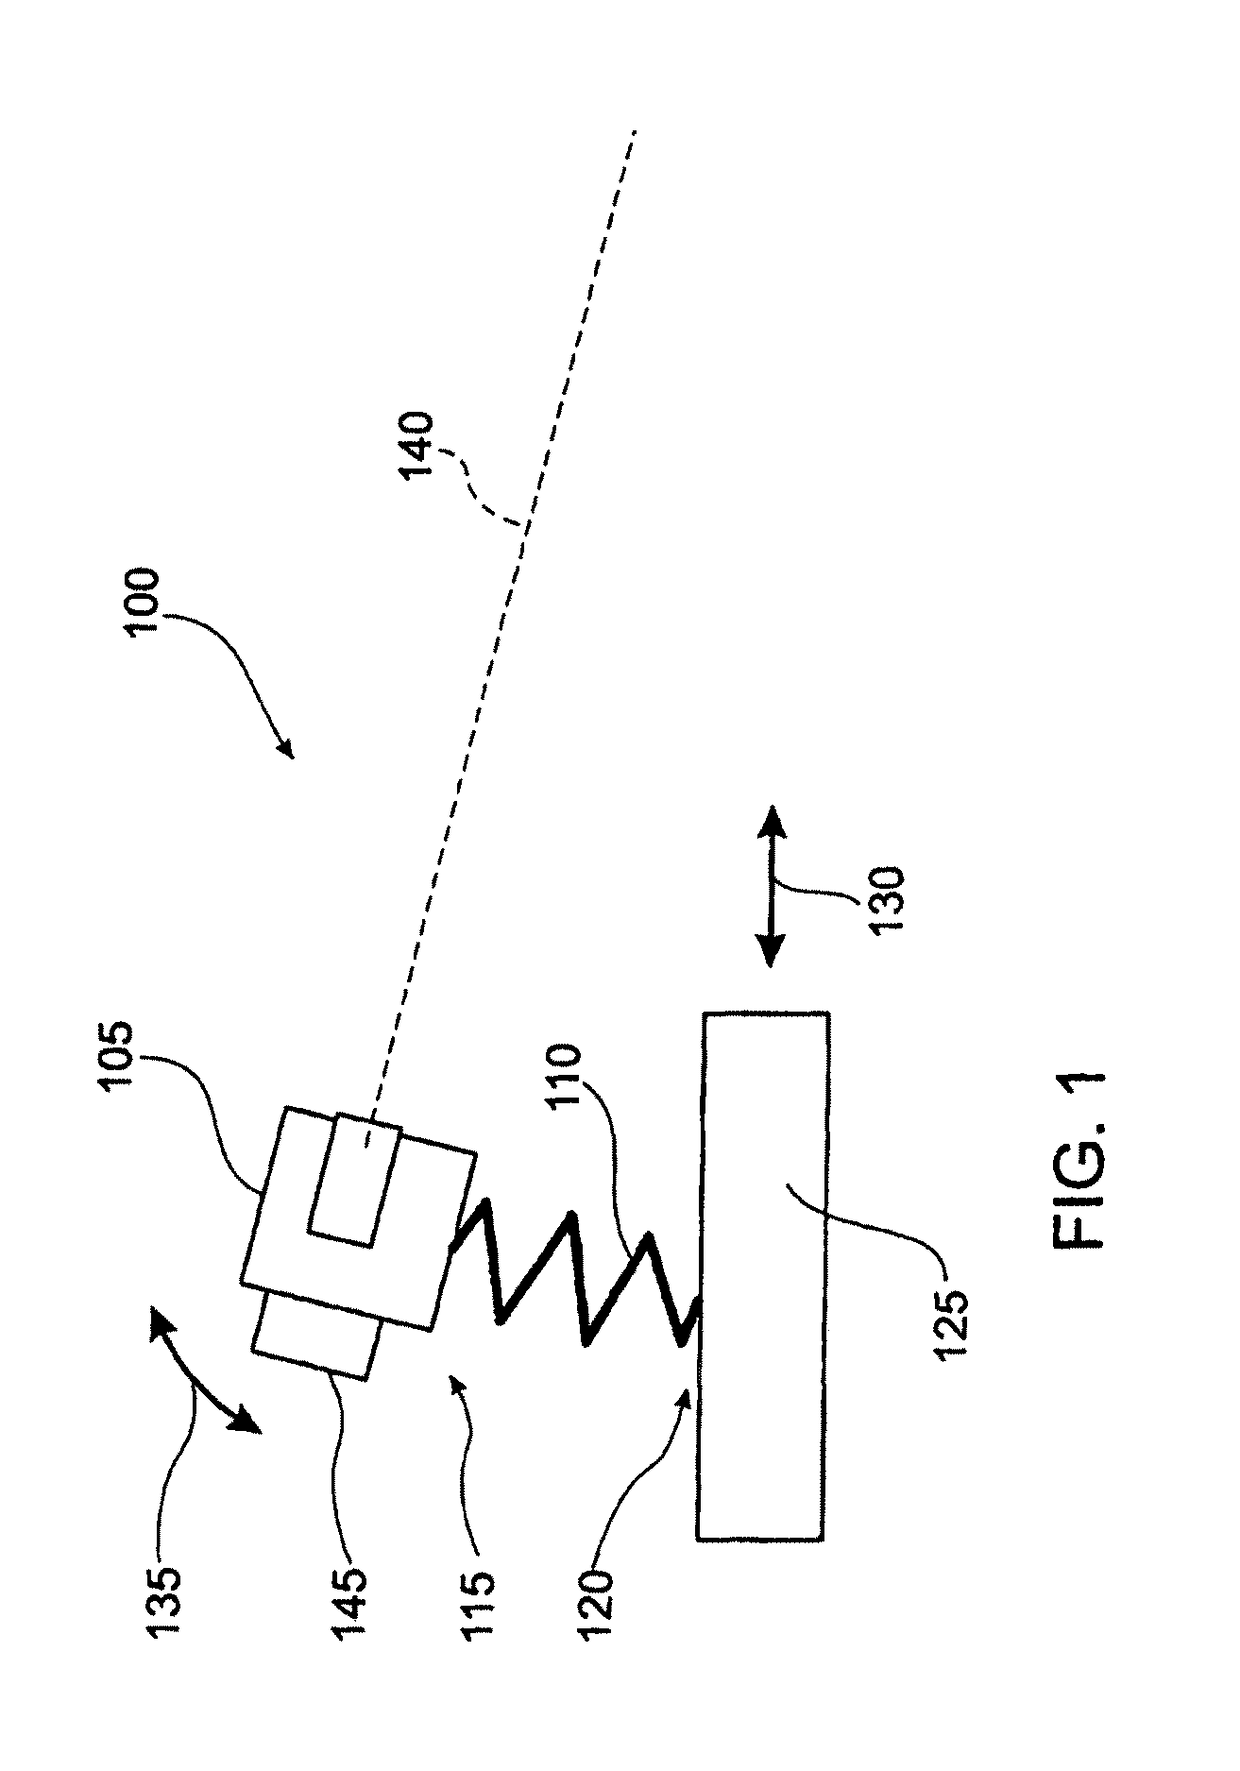 Three dimensional scanning beam and imaging system